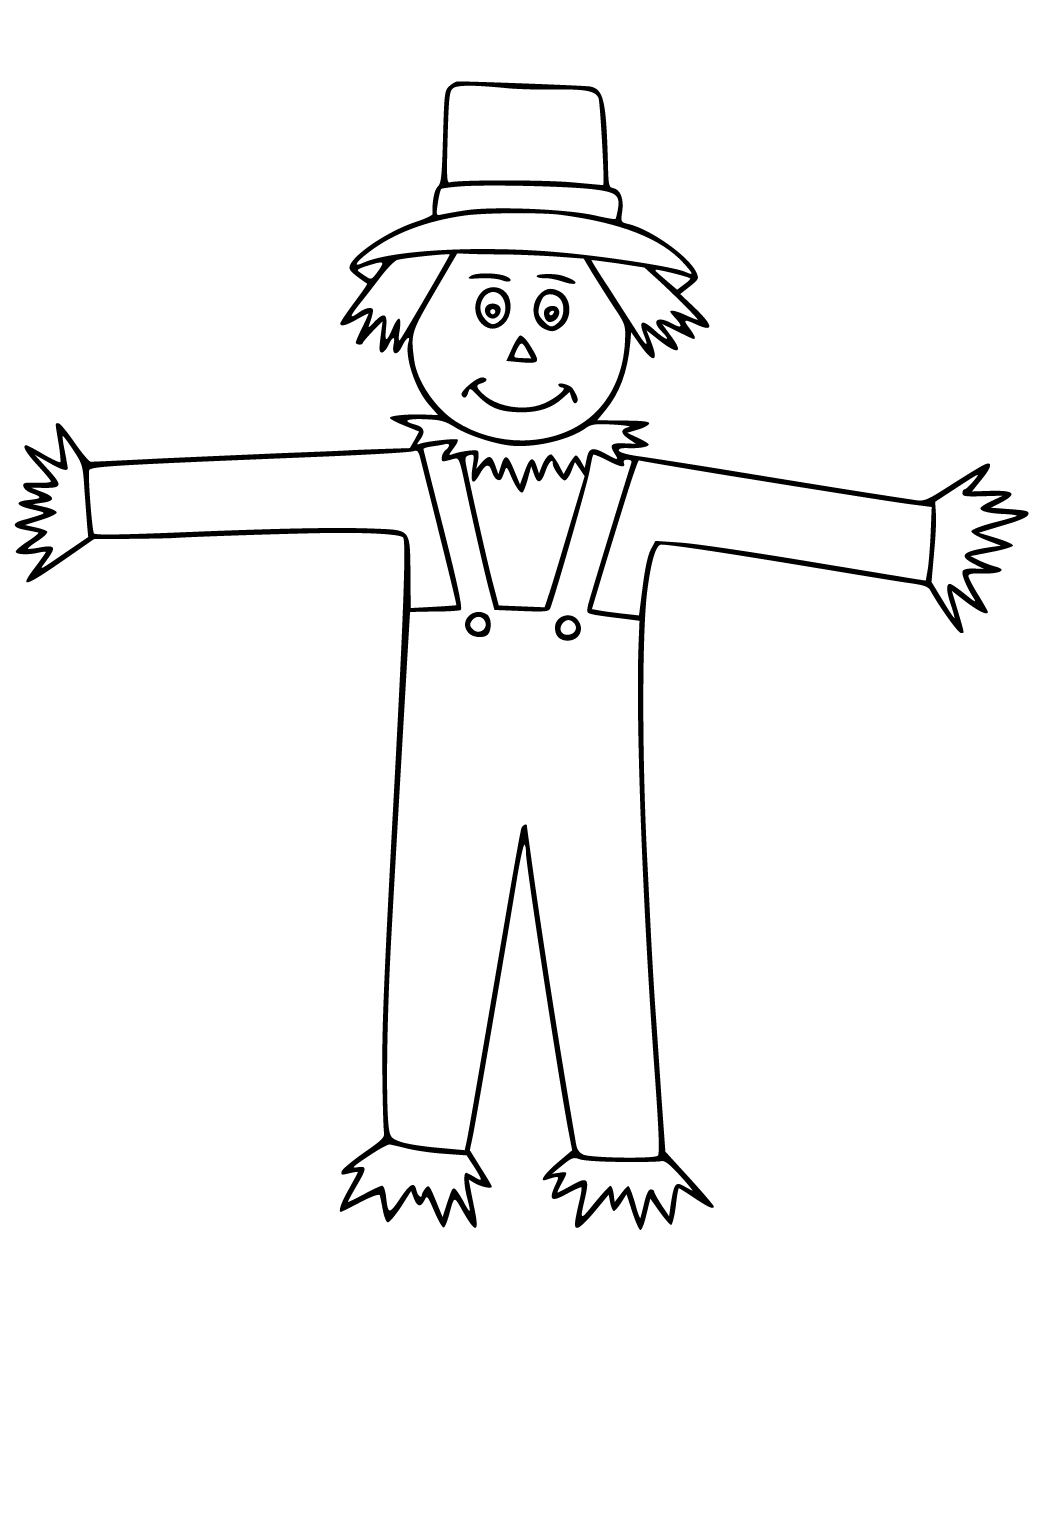 Free printable scarecrow easy coloring page for adults and kids